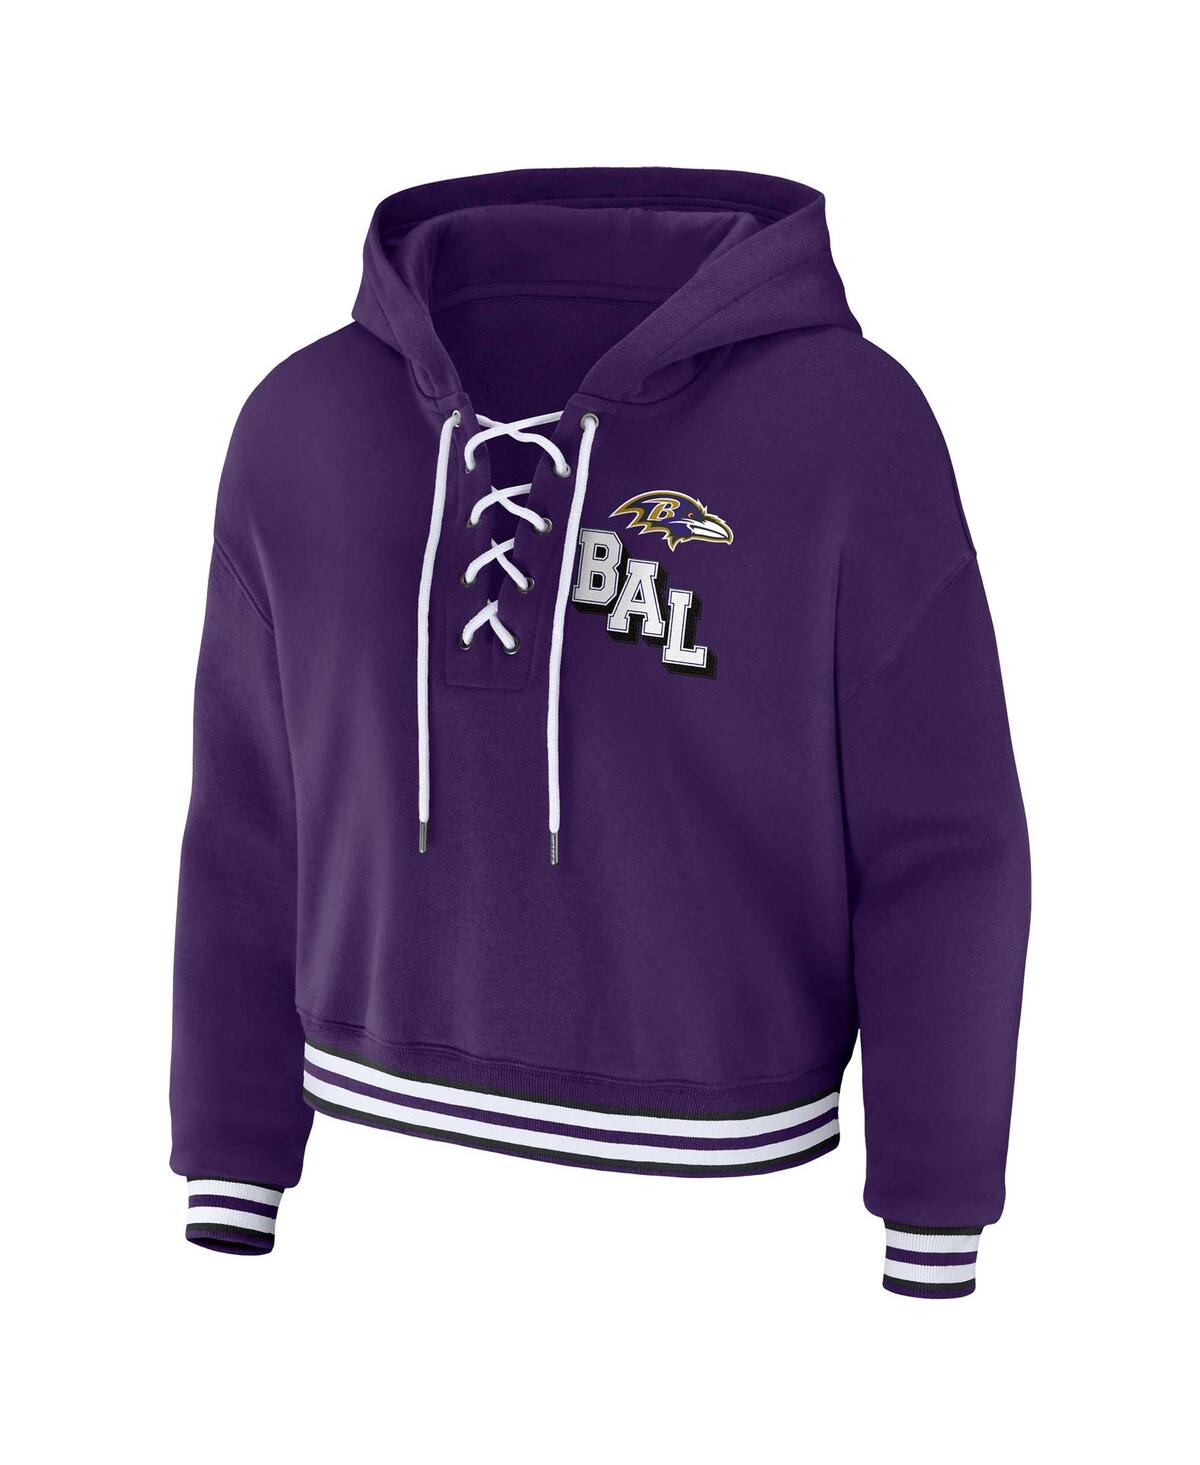 Shop Wear By Erin Andrews Women's  Purple Baltimore Ravens Plus Size Lace-up Pullover Hoodie